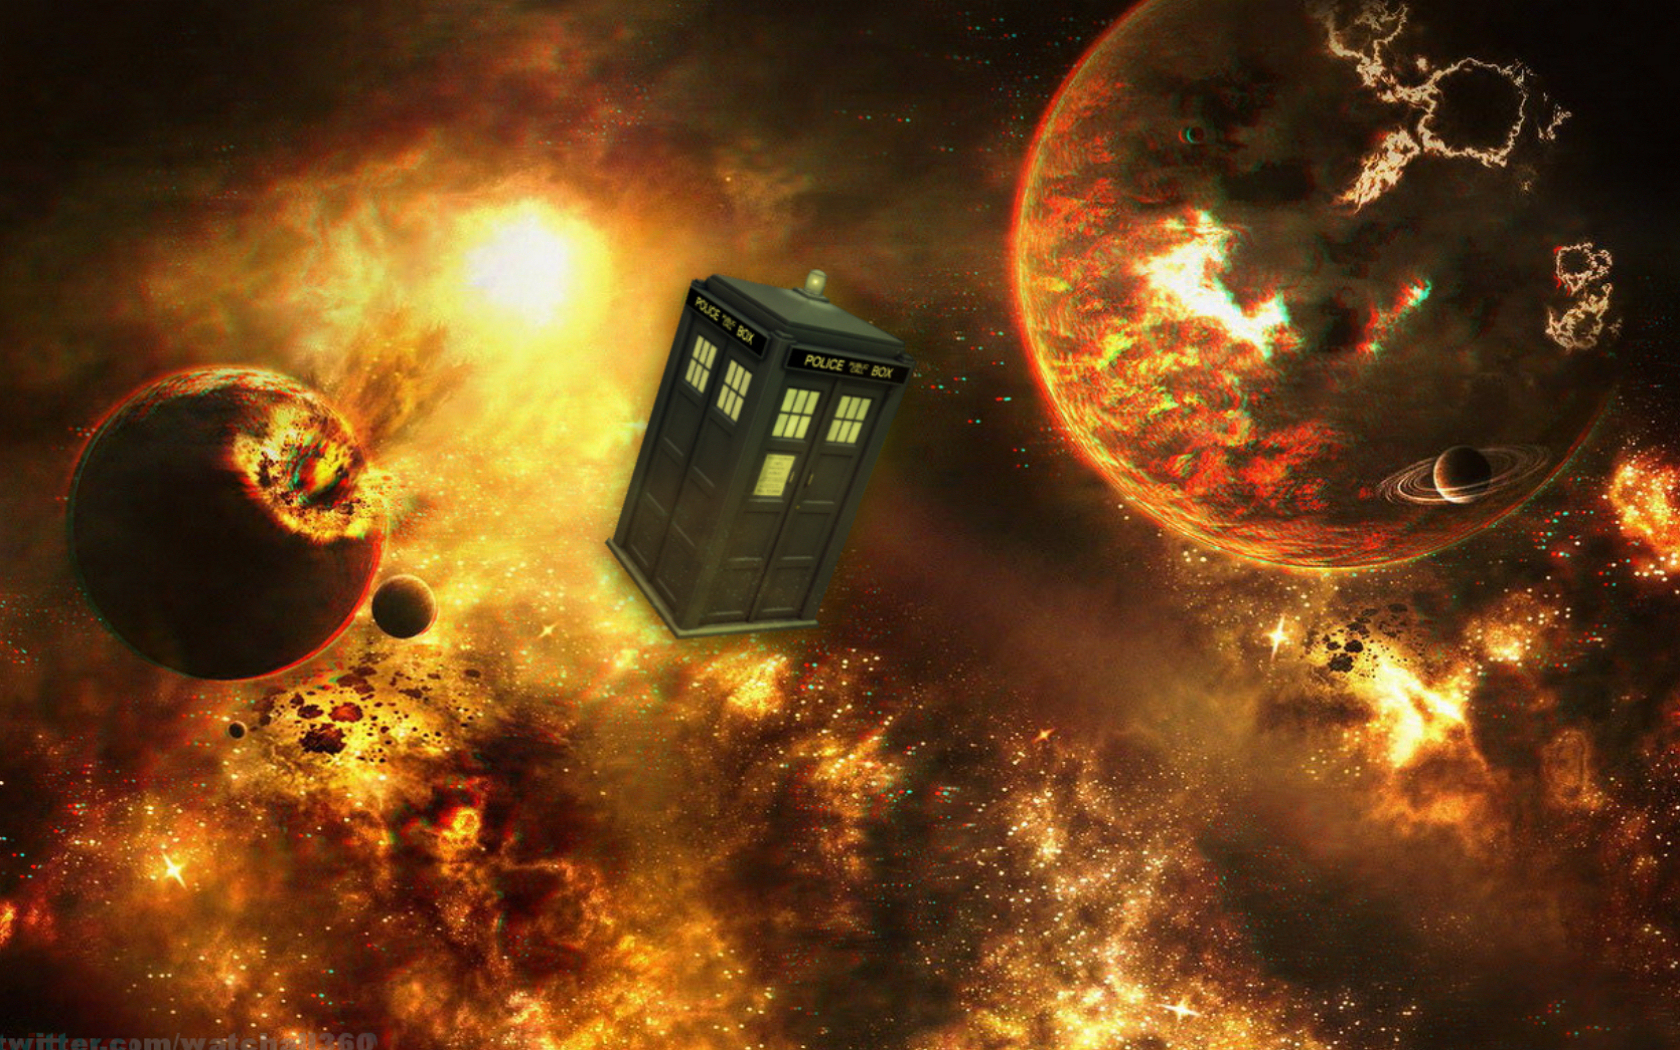 dr who Computer Wallpapers, Desktop Backgrounds | 1680x1050 | ID ...